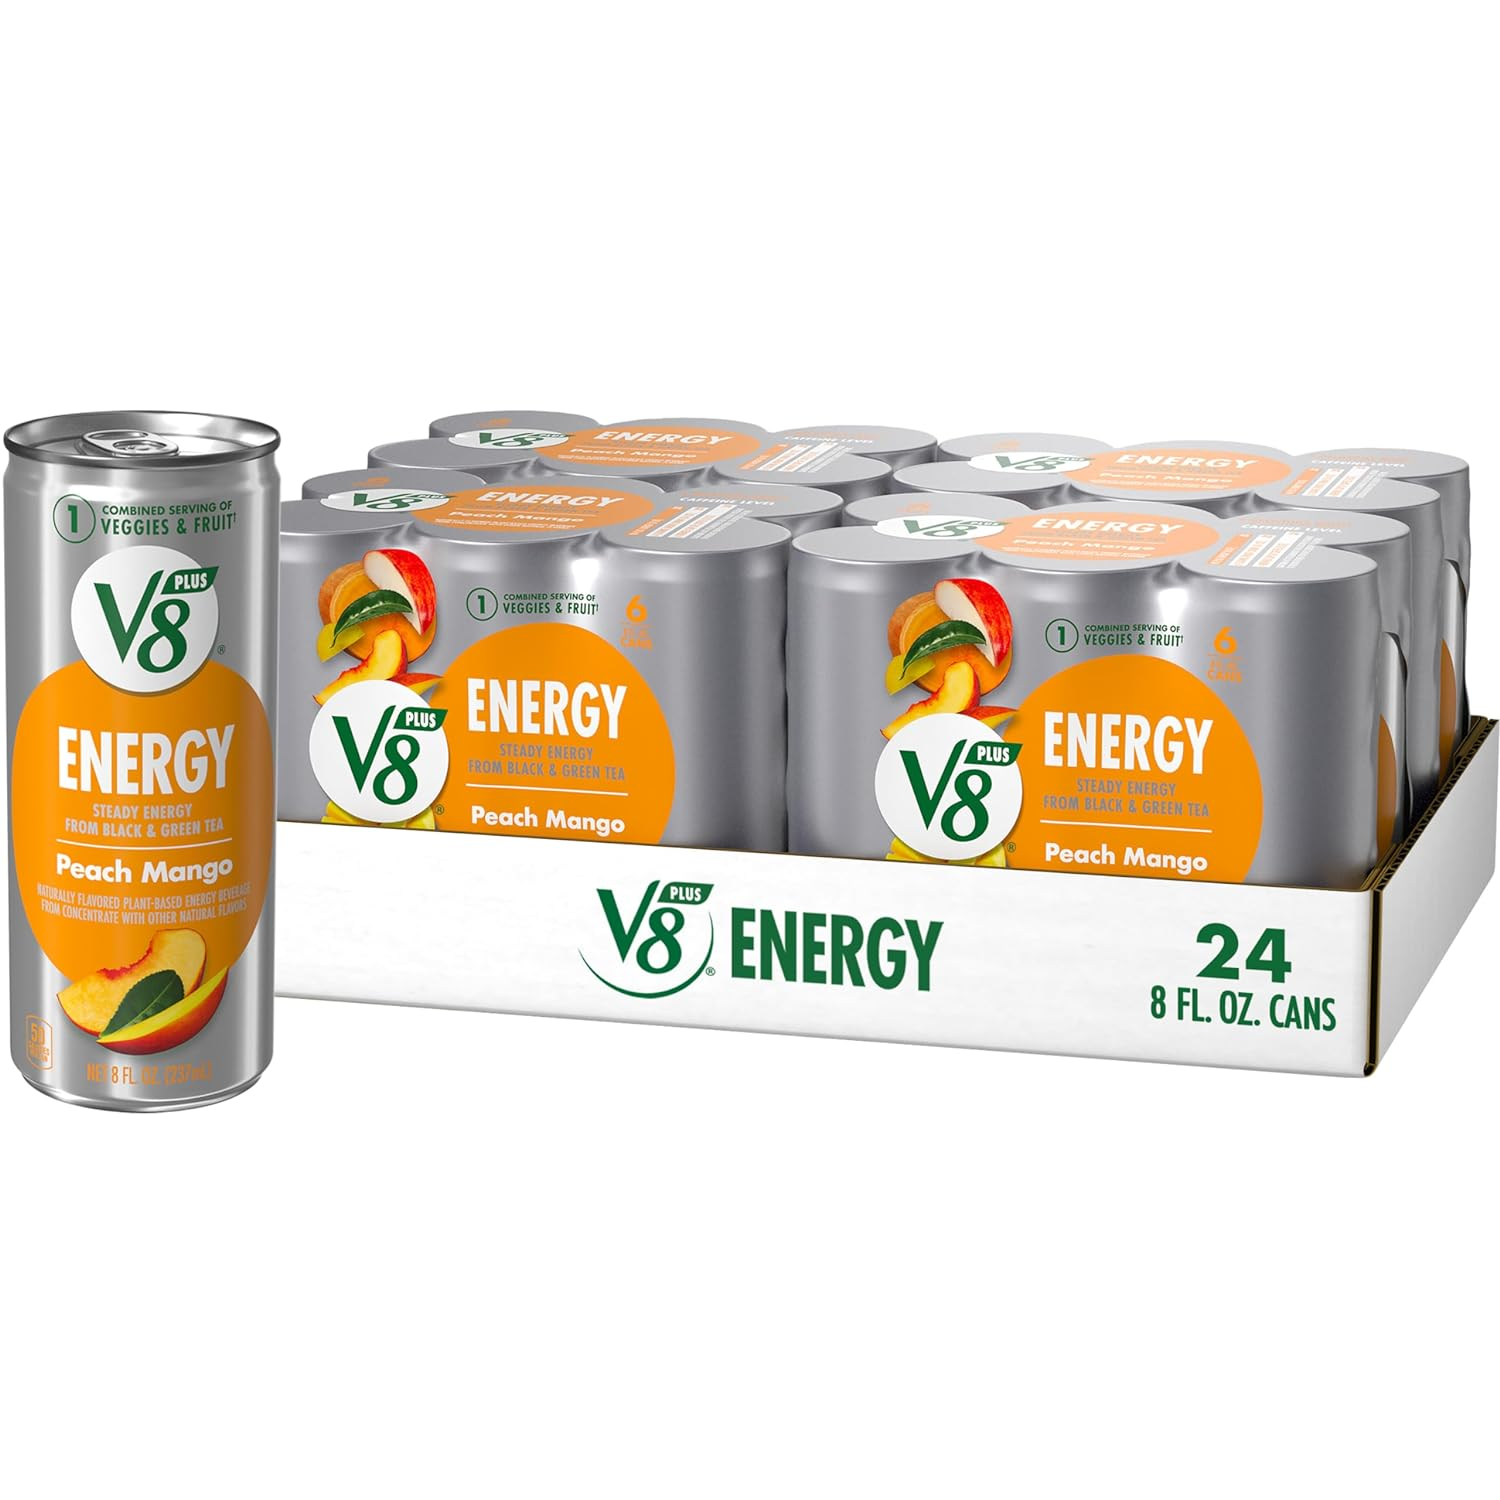 V8 +Energy Peach Mango Energy Drink, 8 fl oz Can (Pack of 6) (Case of 4) : $13.83 as low as $12.04 S&S 5+ items